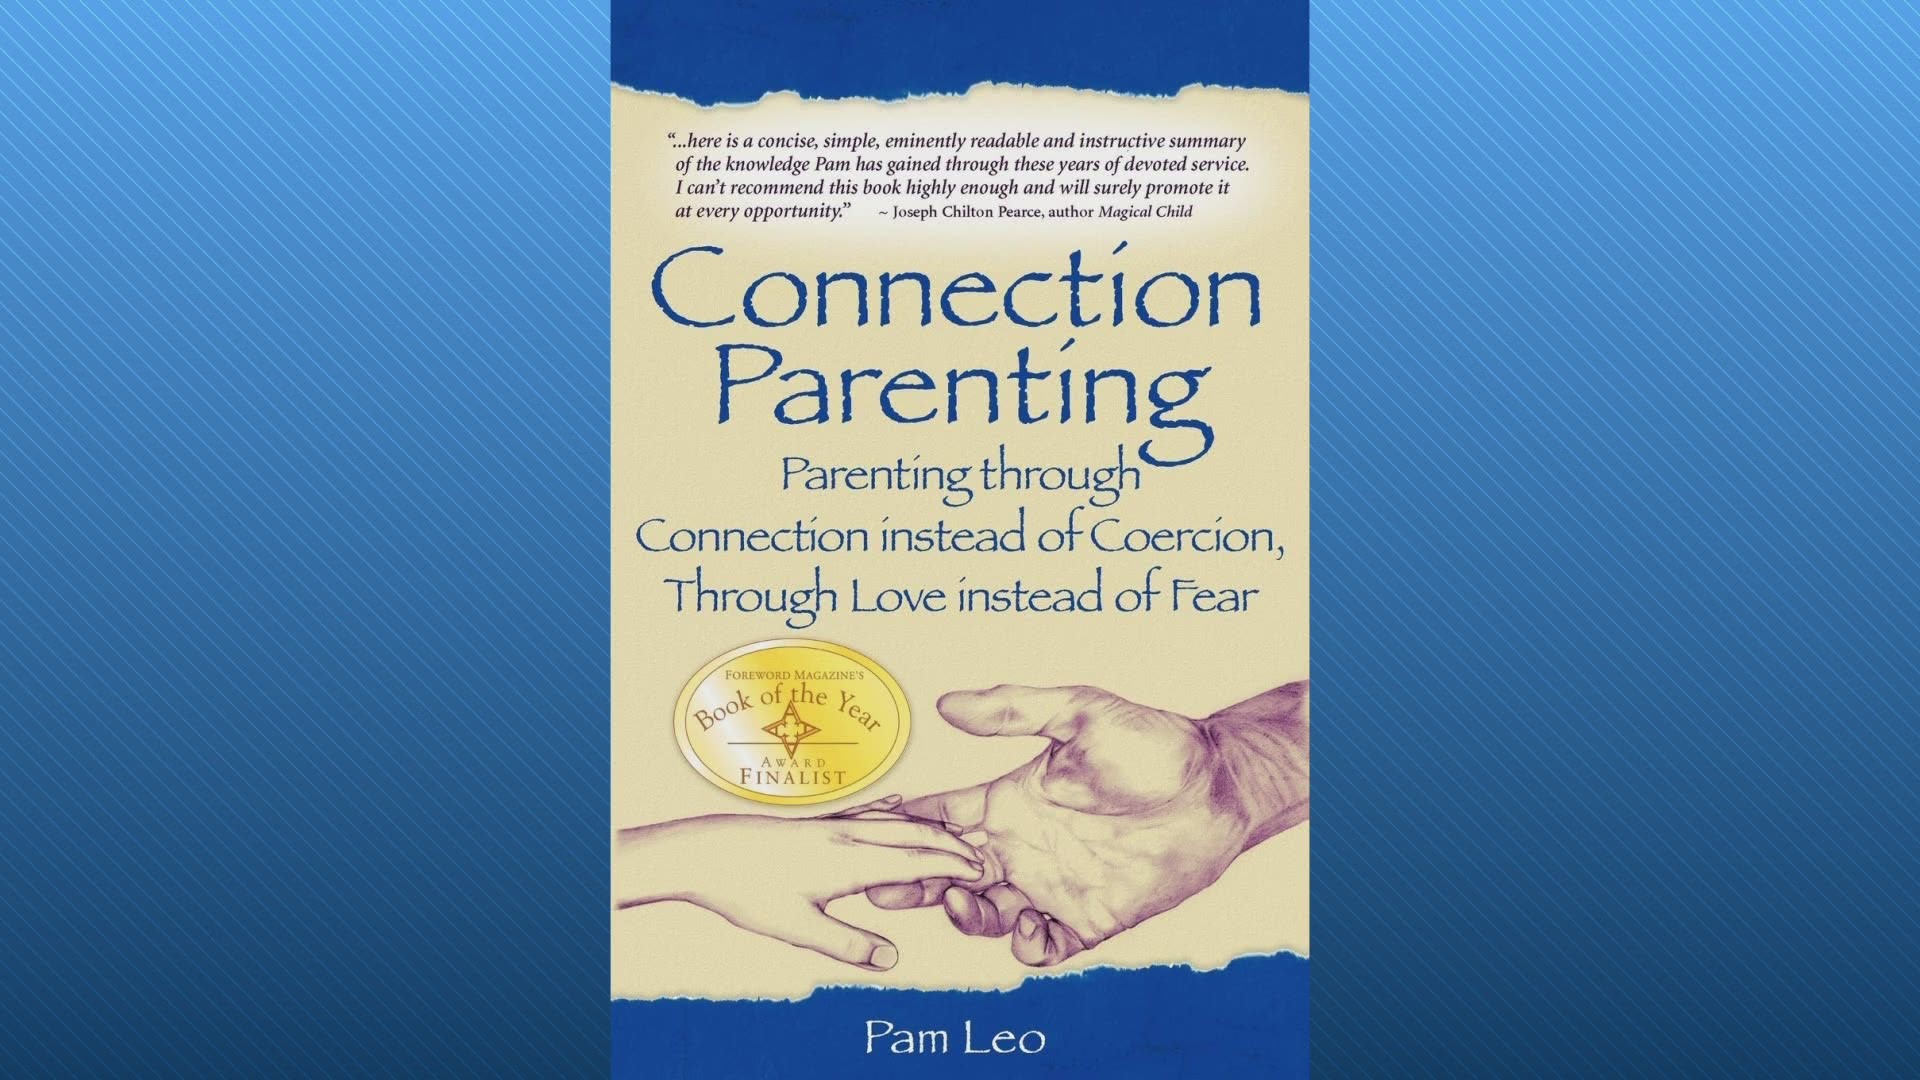 Pam Leo is the author of "Connection Parenting," which teaches families how to build resiliency through connection.